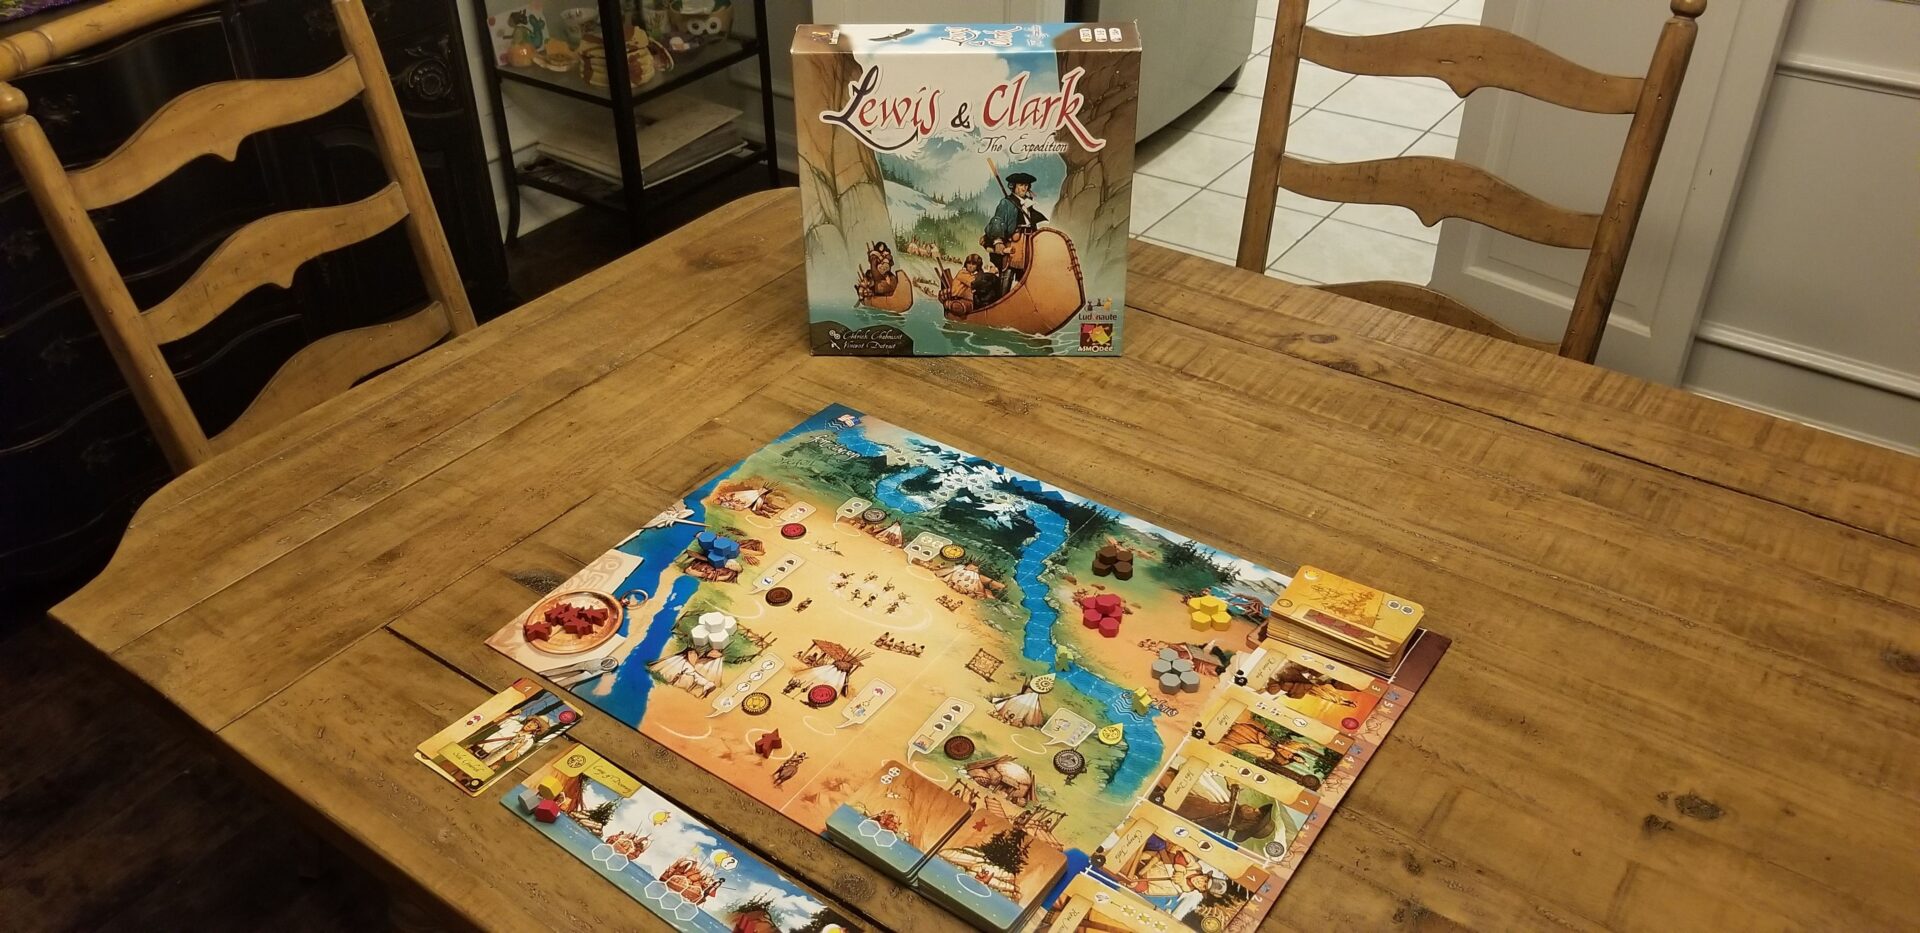 lewis and clark the expedition boardgamebreakdown